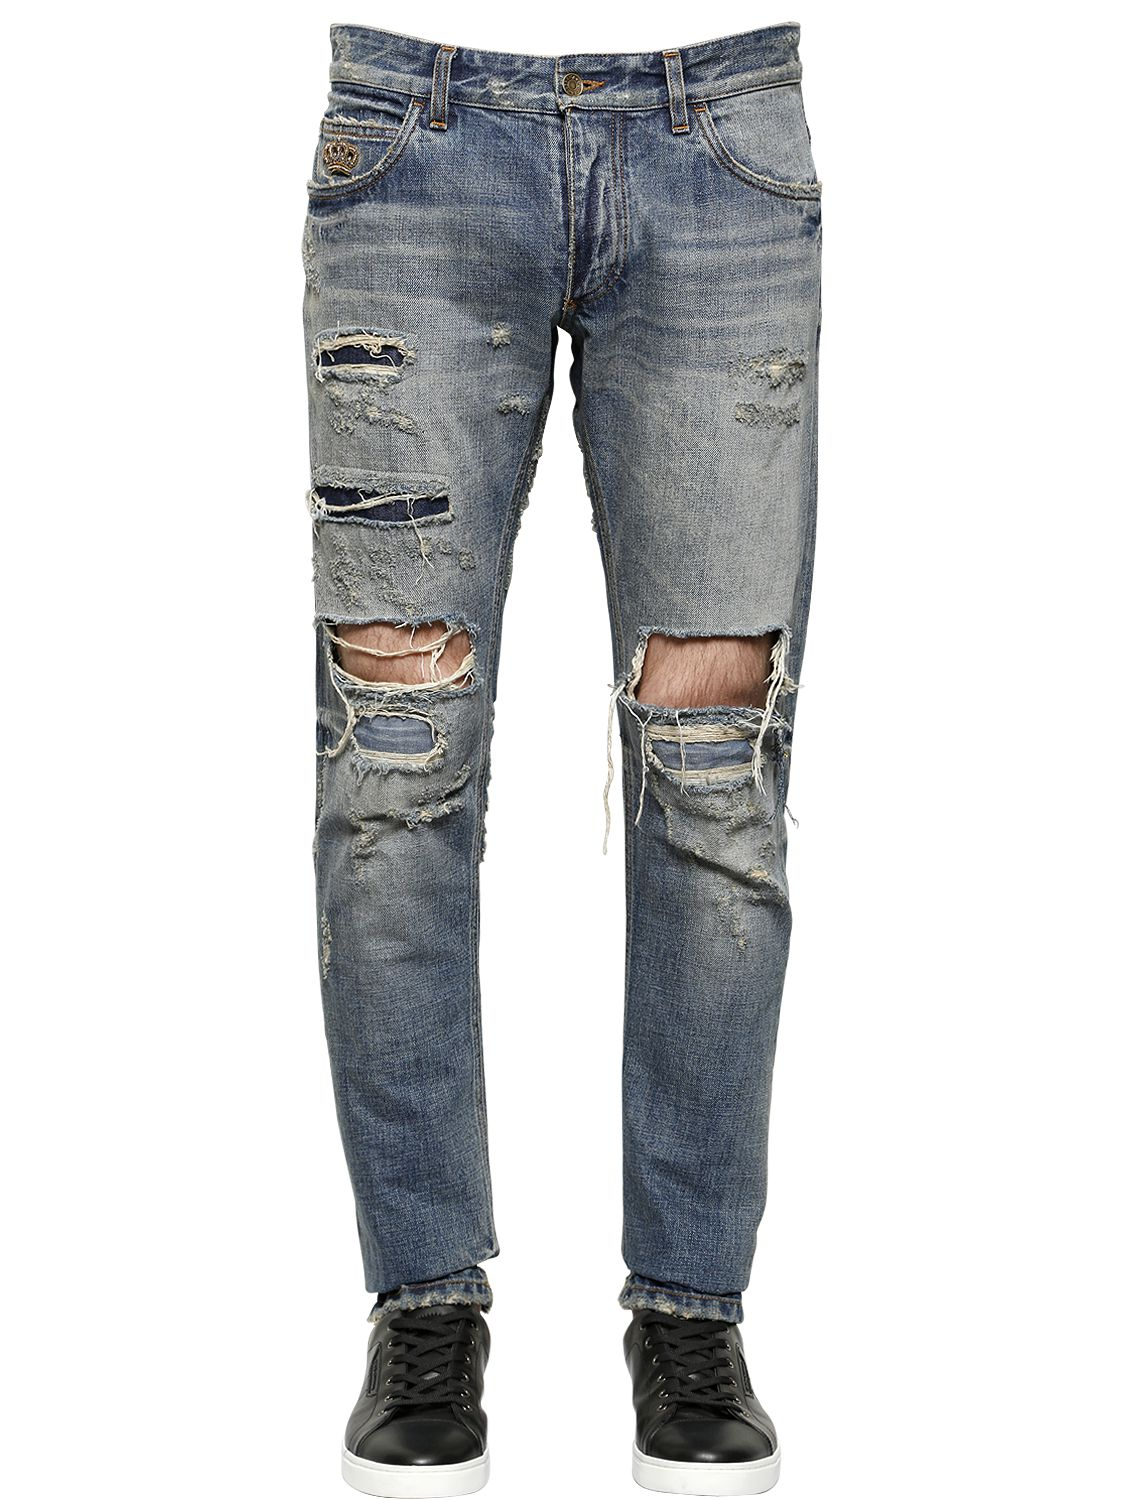 Lyst - Dolce & Gabbana Ripped Jeans in Blue for Men